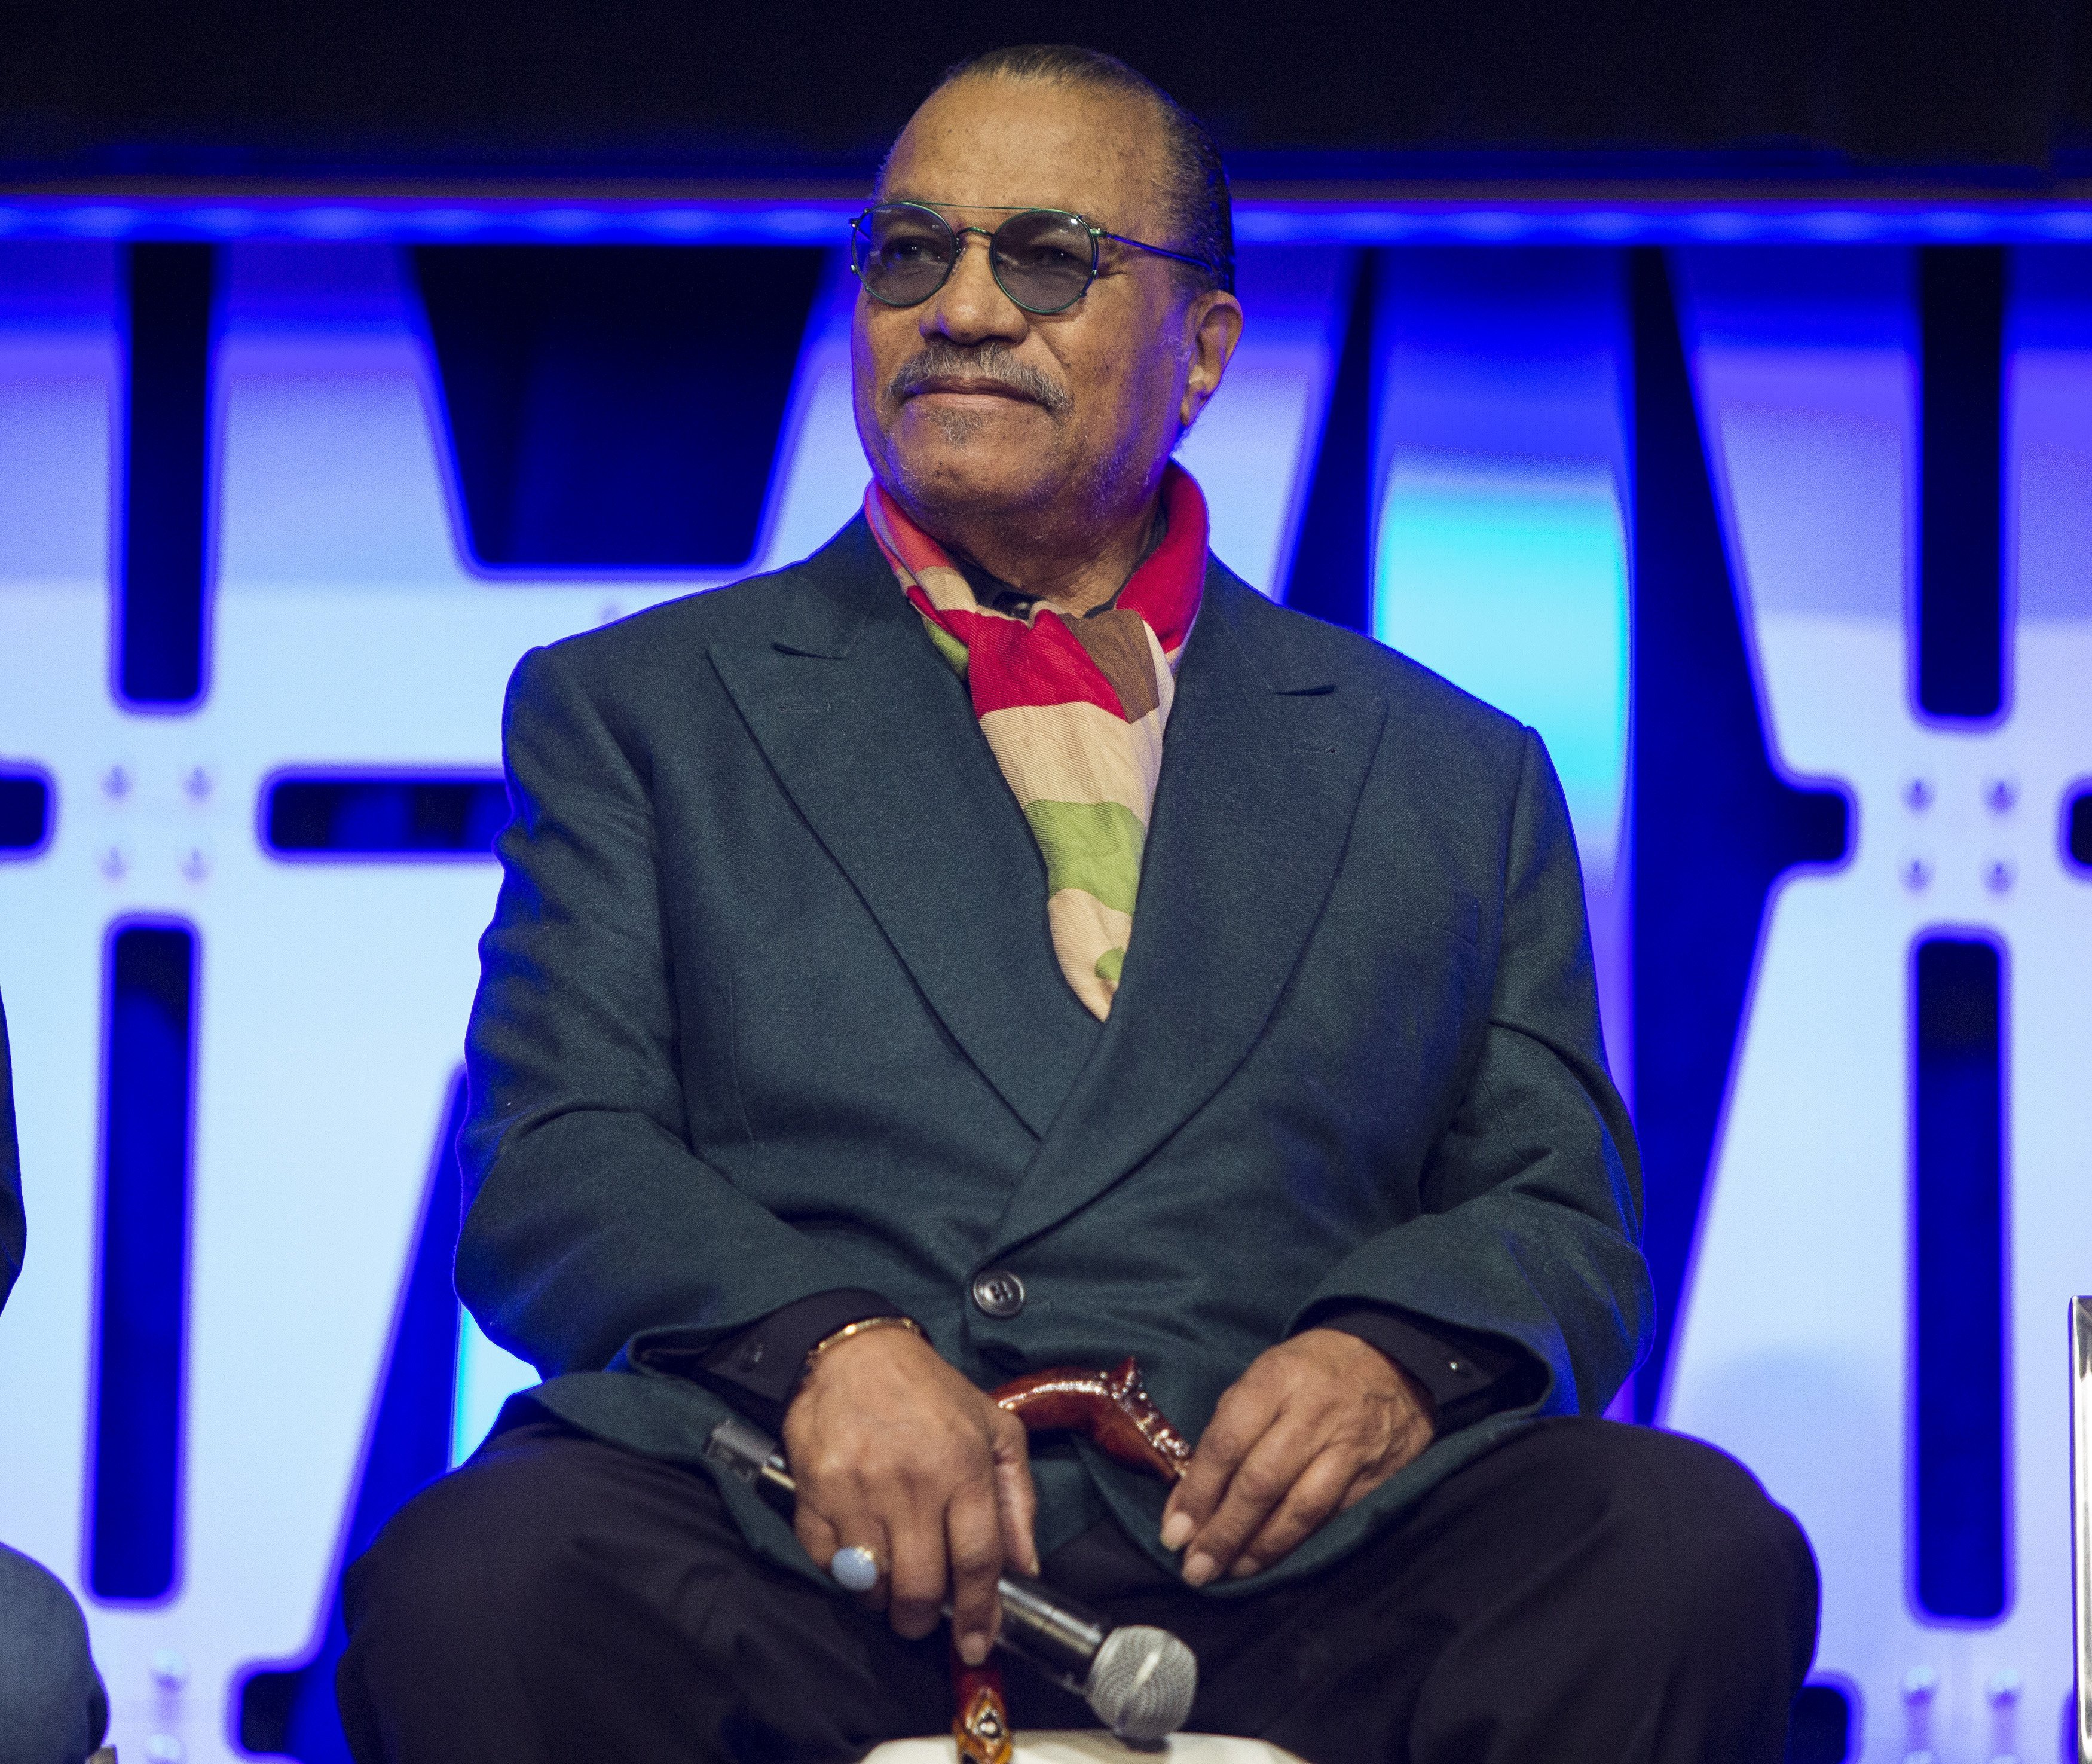 Billy Dee Williams speaking onstage at the Star Wars Celebration on April 12, 2019. | Photo: Getty Images